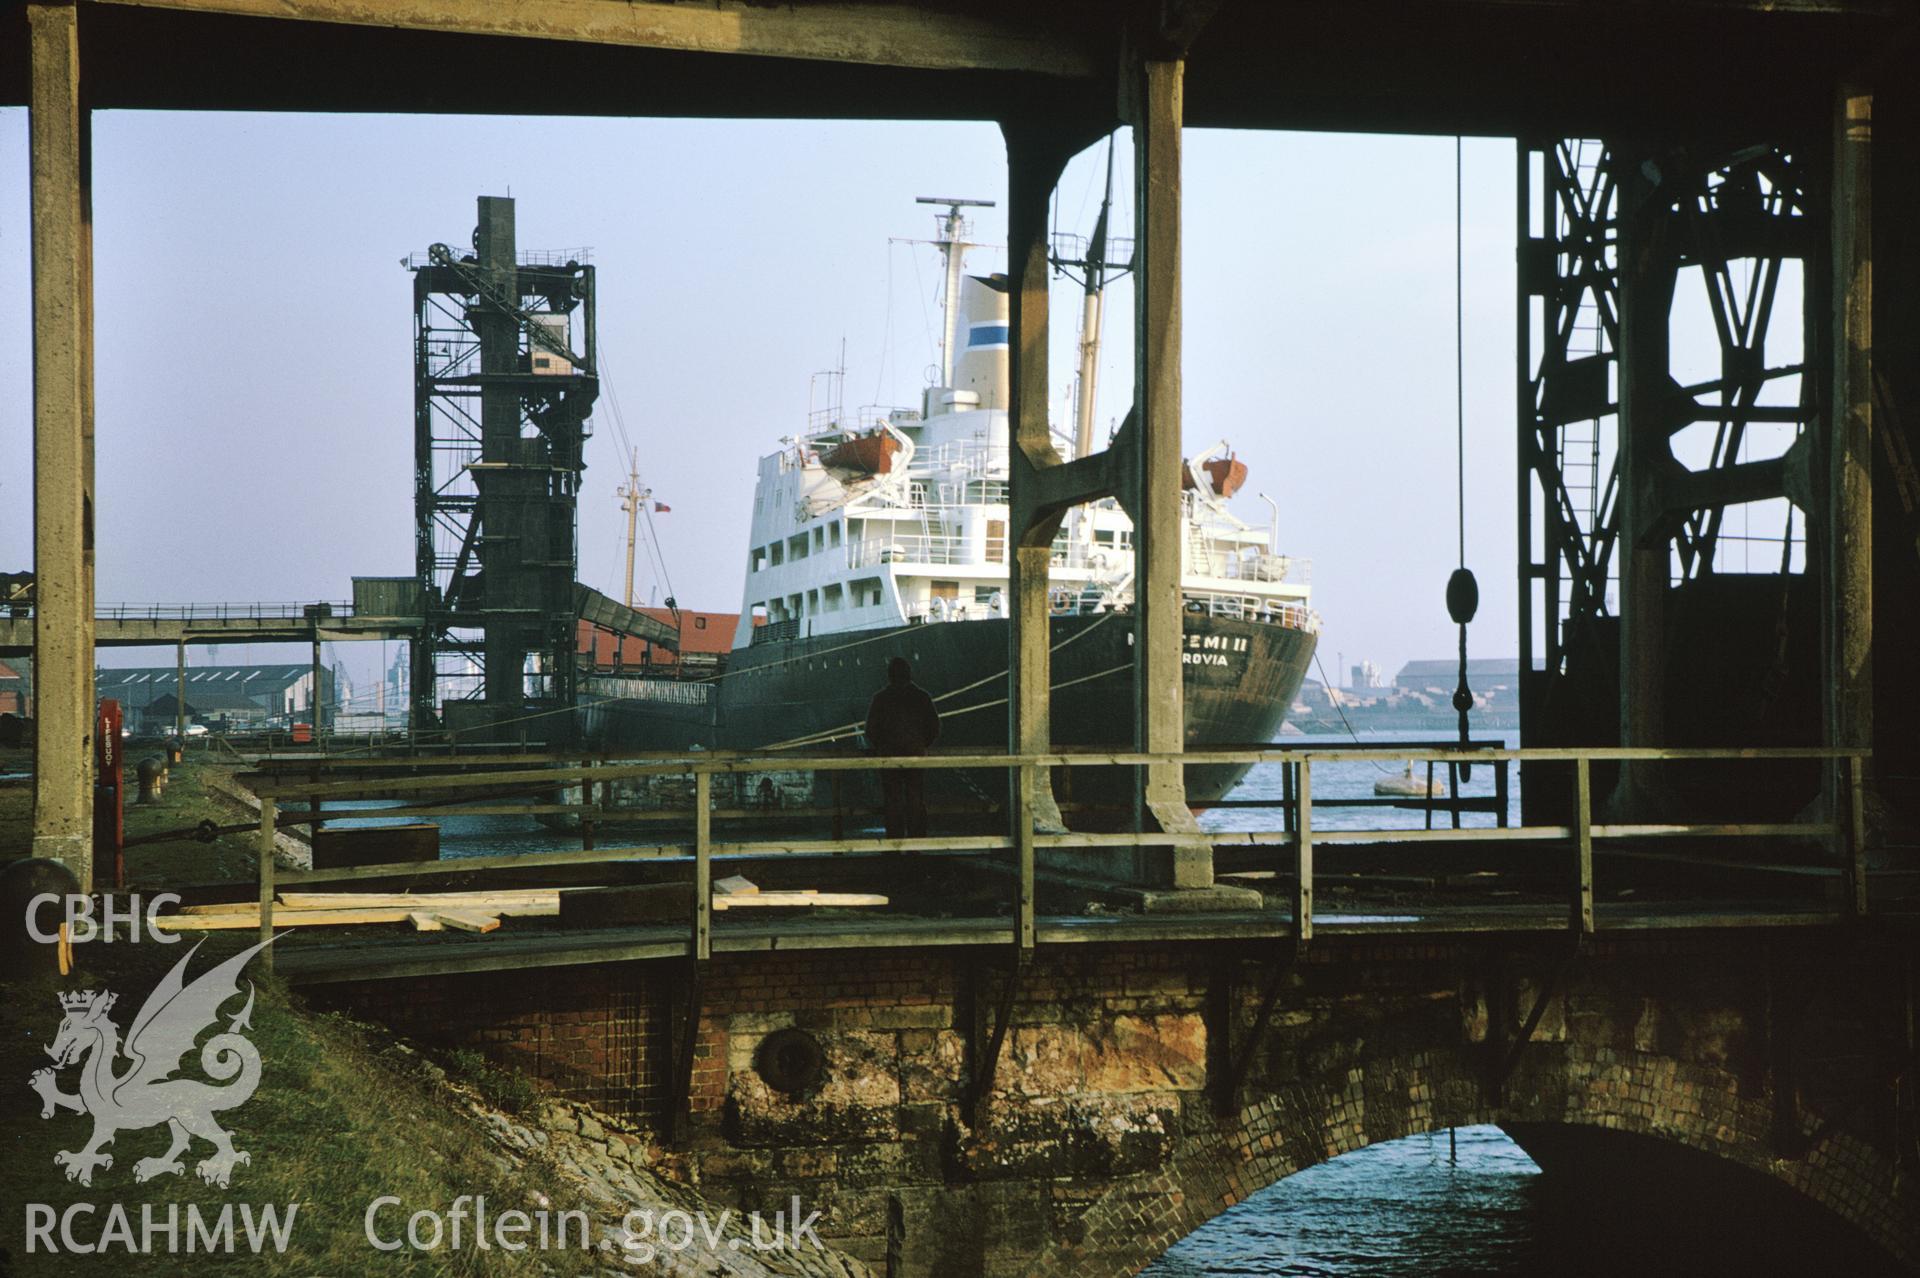 35mm colour slide showing coal shoot at Barry Dock, Glamorgan by Dylan Roberts.